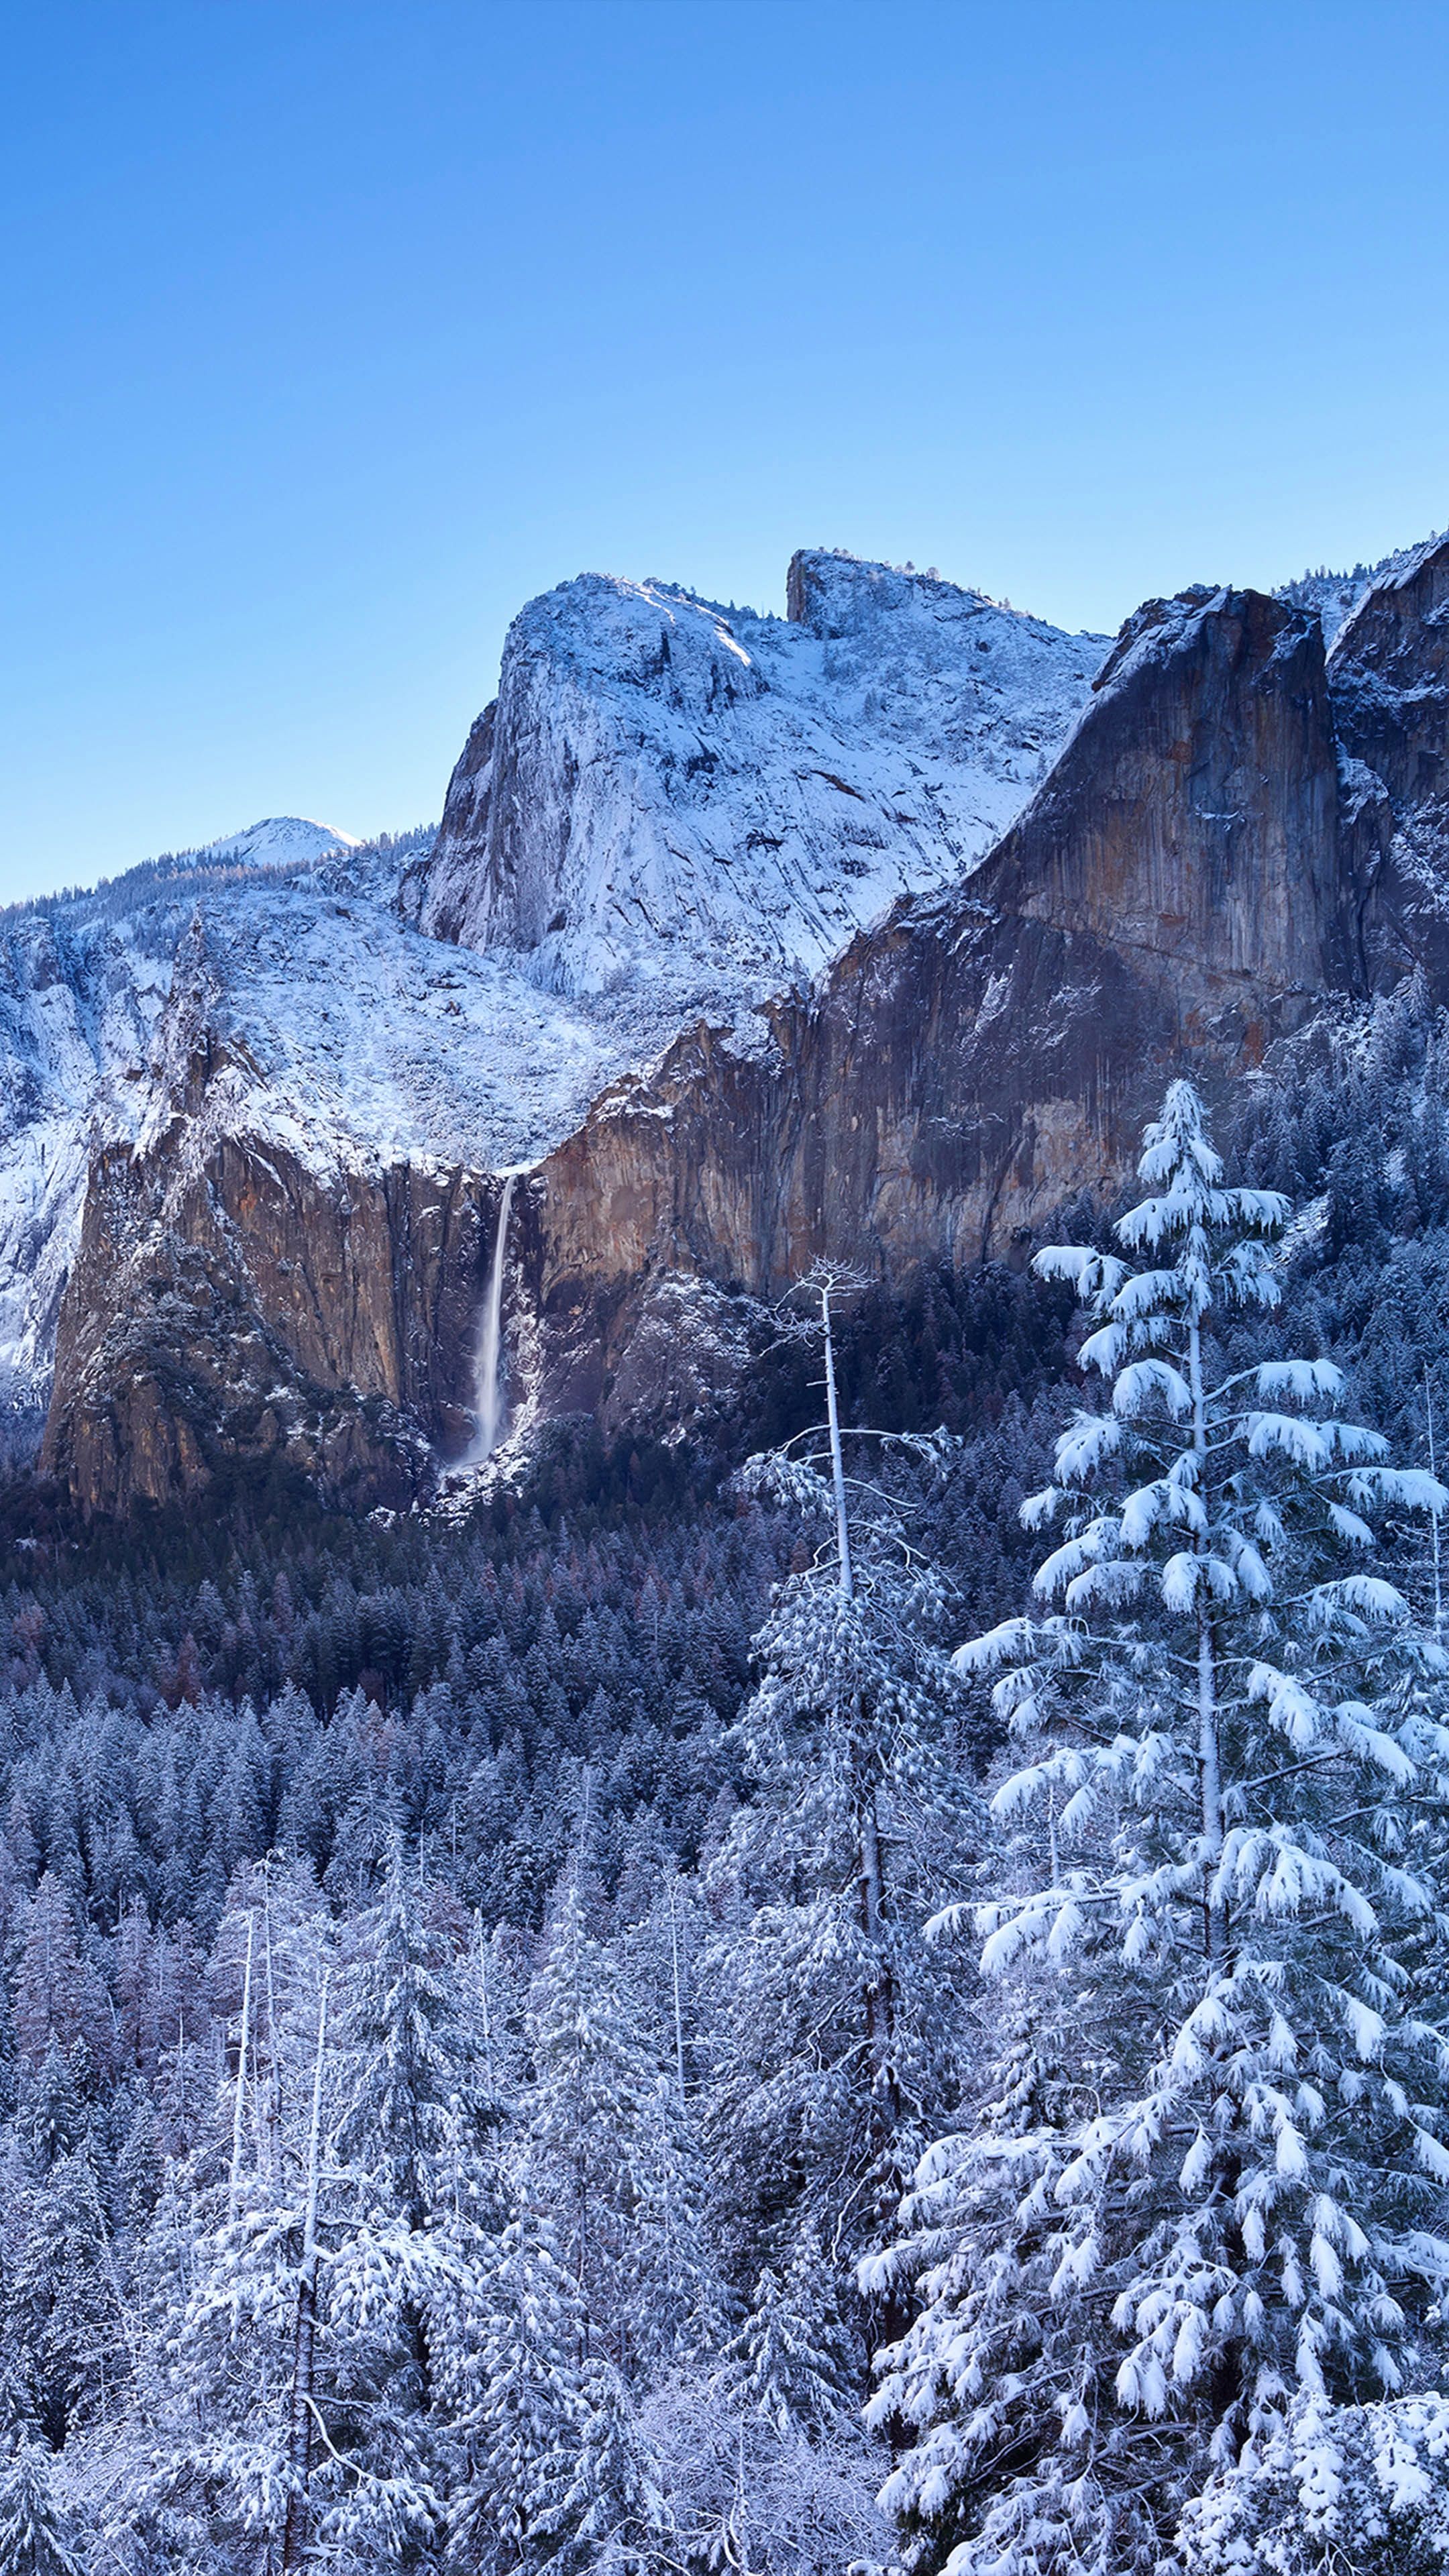 Winter Wallpaper 4k Lovely Download Yosemite National Park Winter Mountains Free Pure 4k Ultra HD Mobile Wallpaper This Month of The Hudson